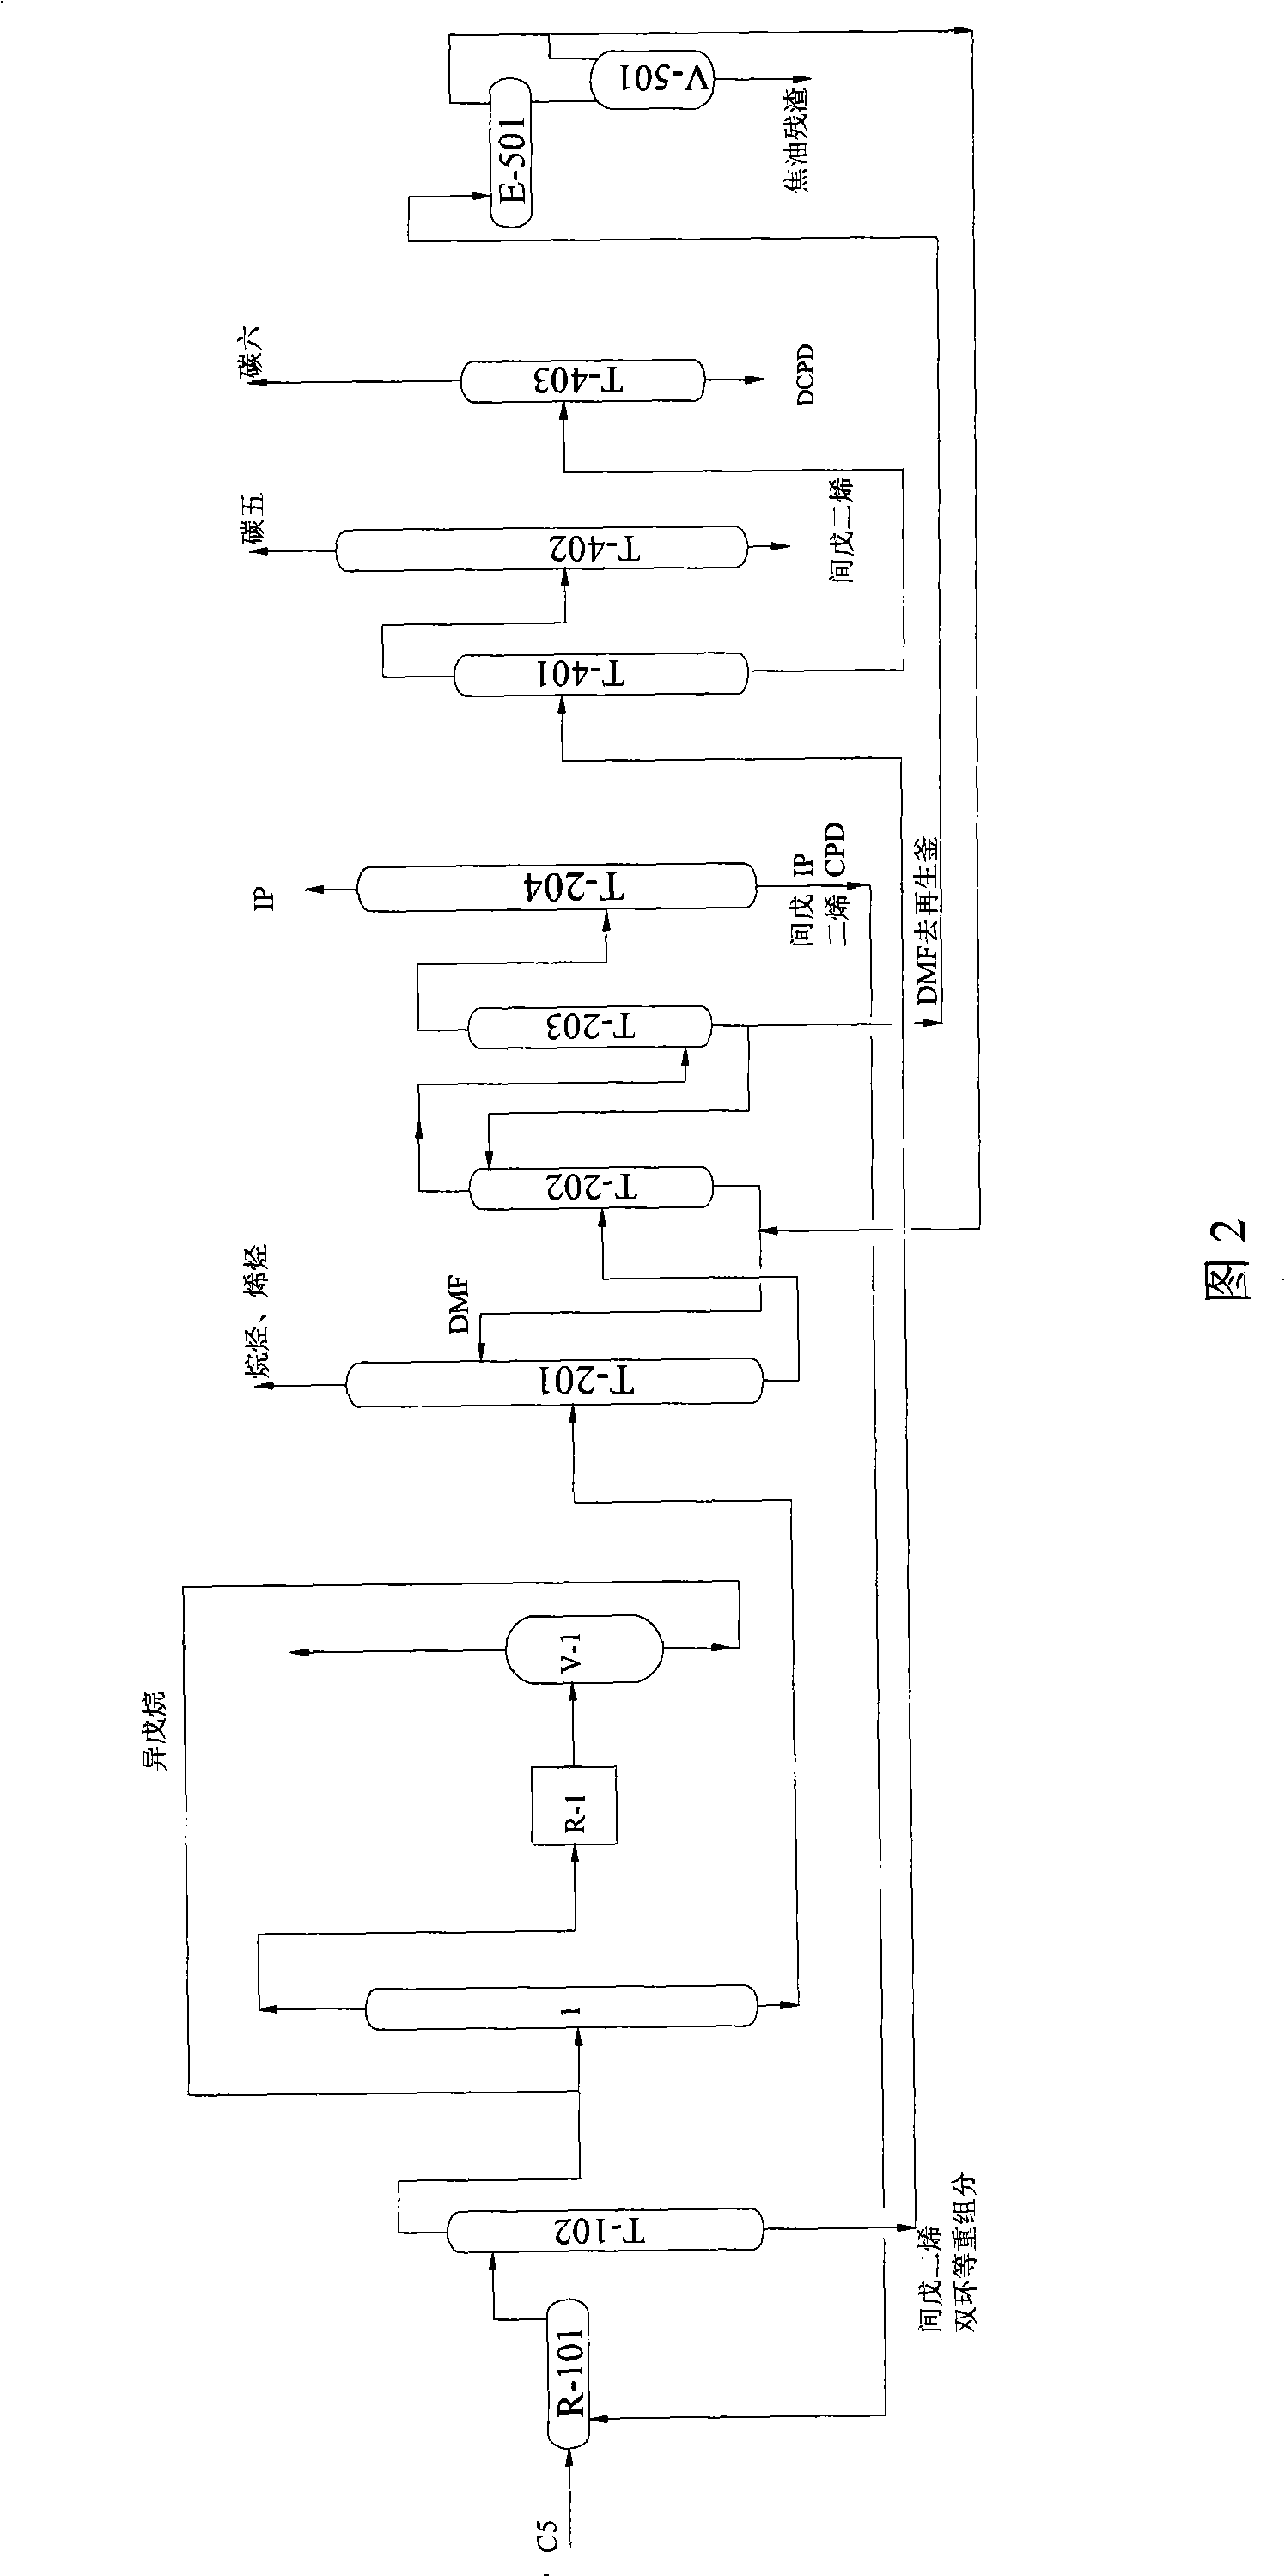 Method for separating isoprene by front-end hydrogenation one-stage extraction